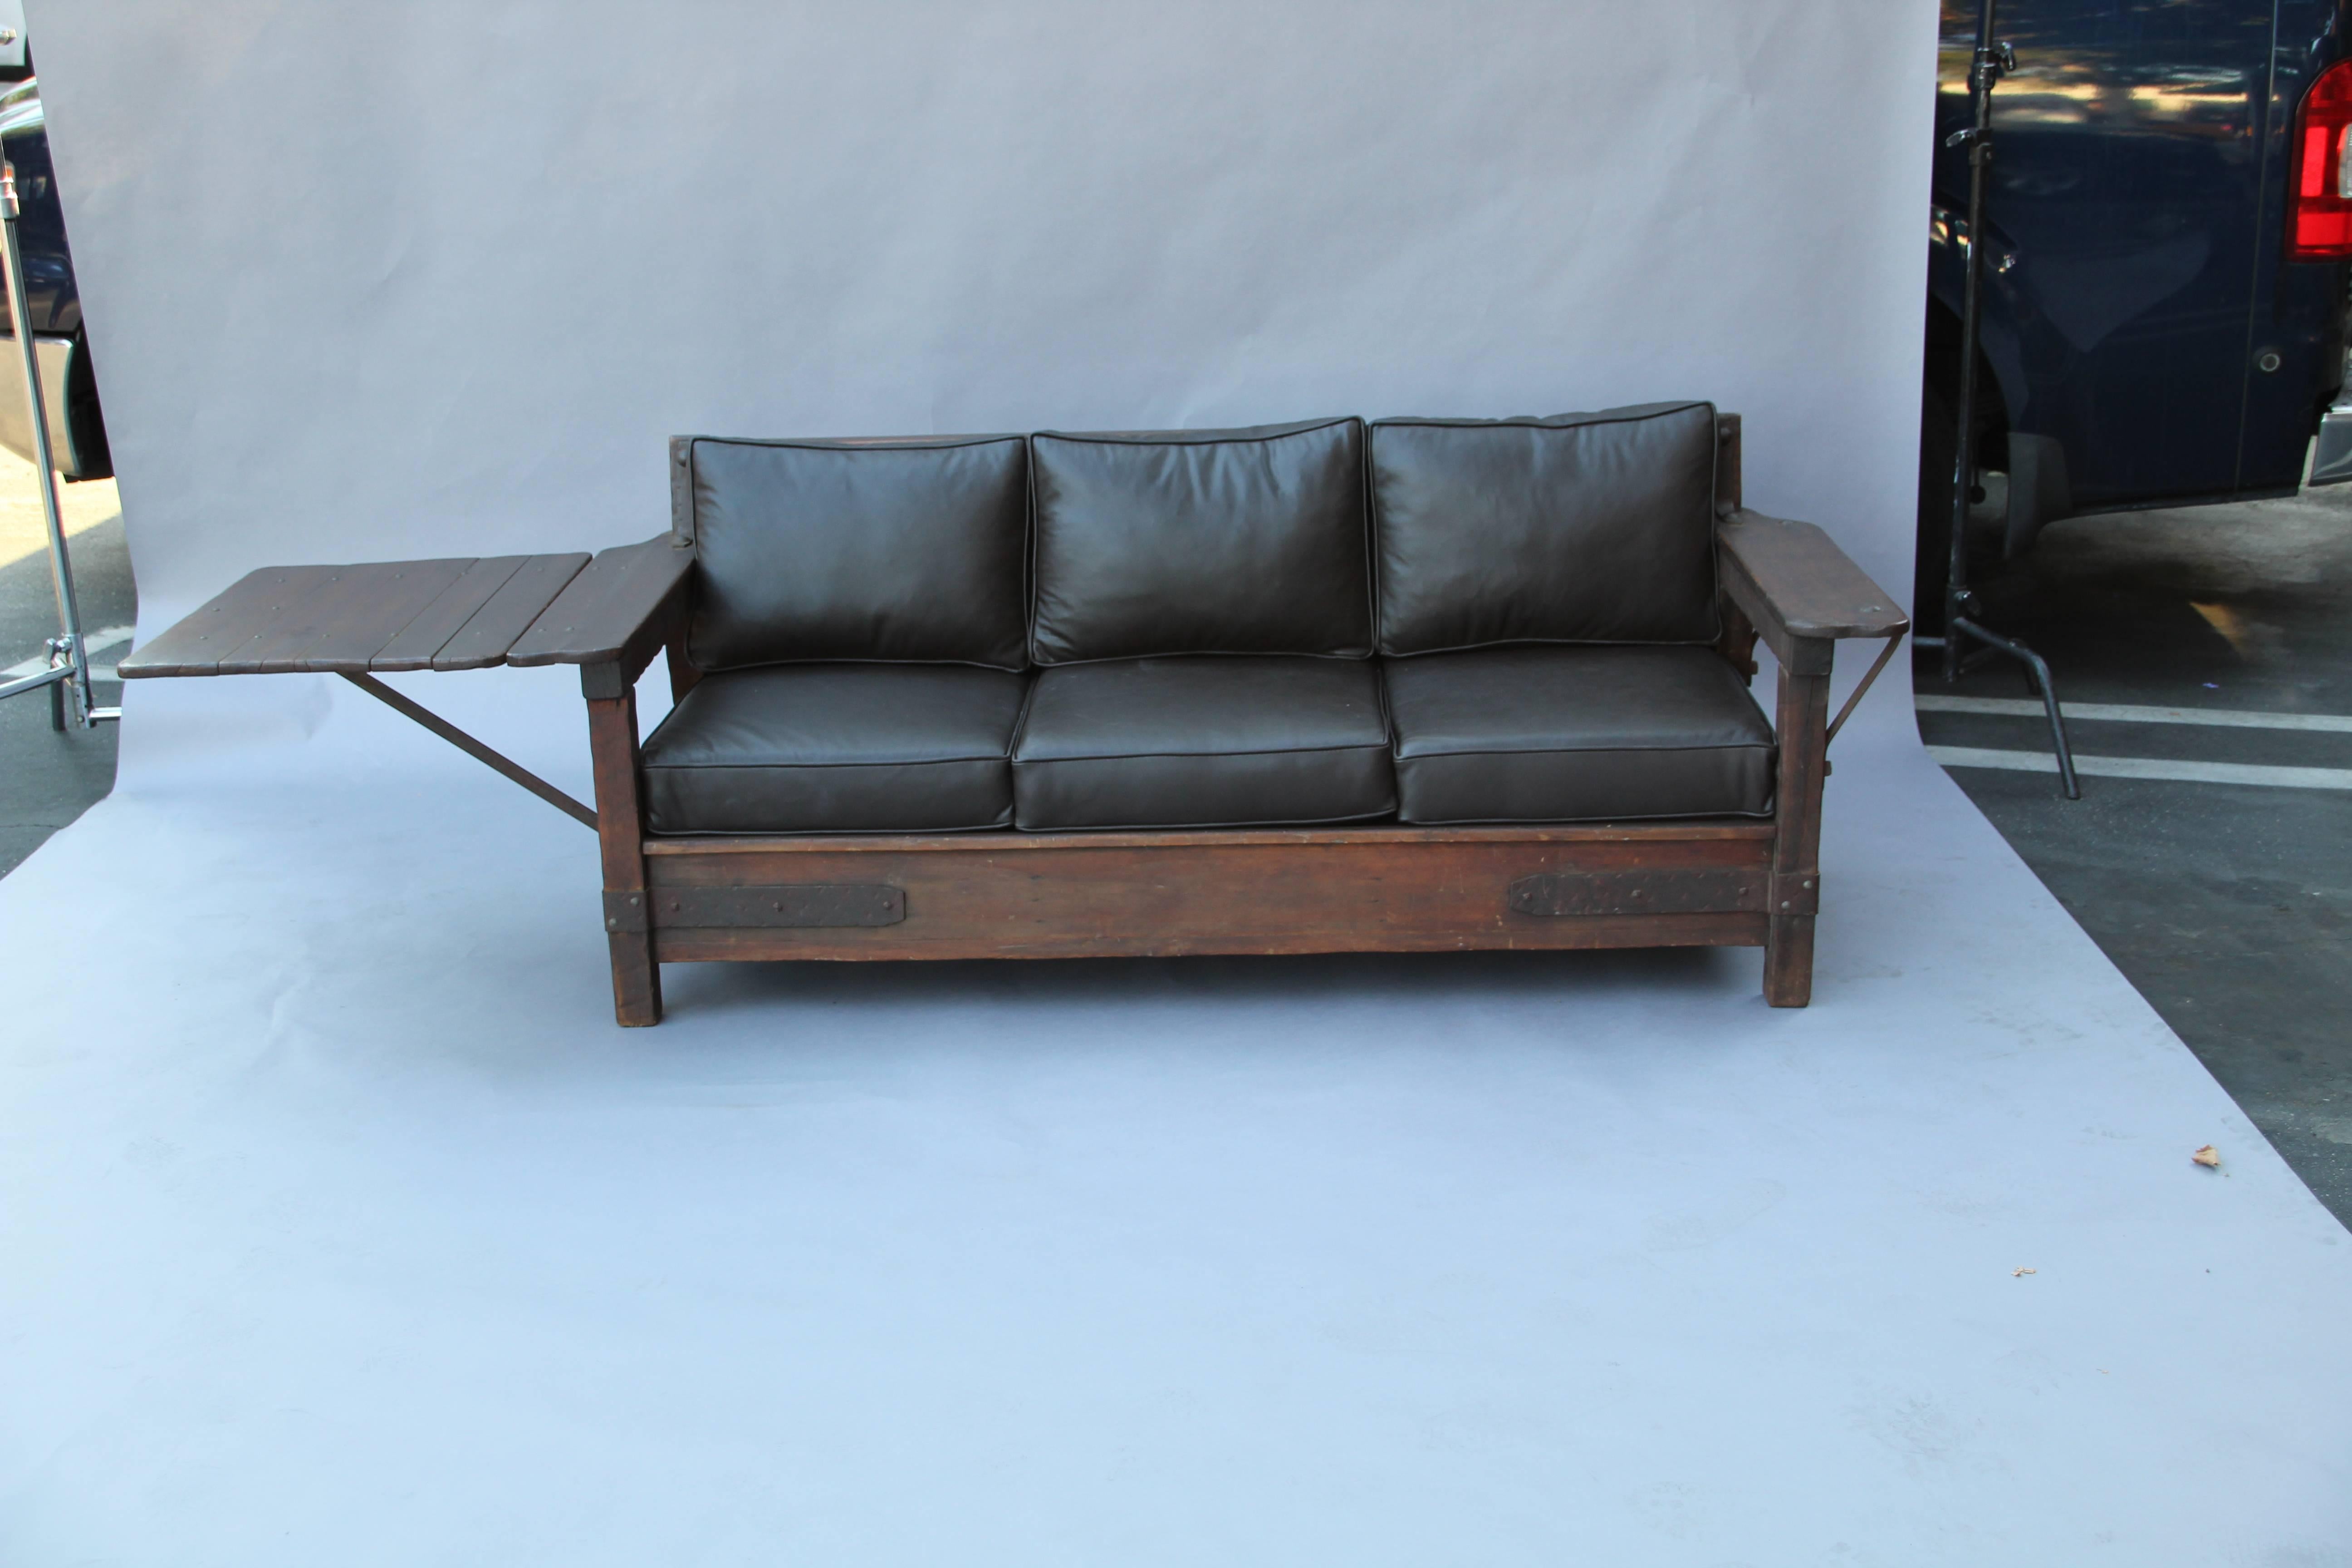 American Signed Monterey Rancho Sofa with Drop Arm with Old Wood Finish